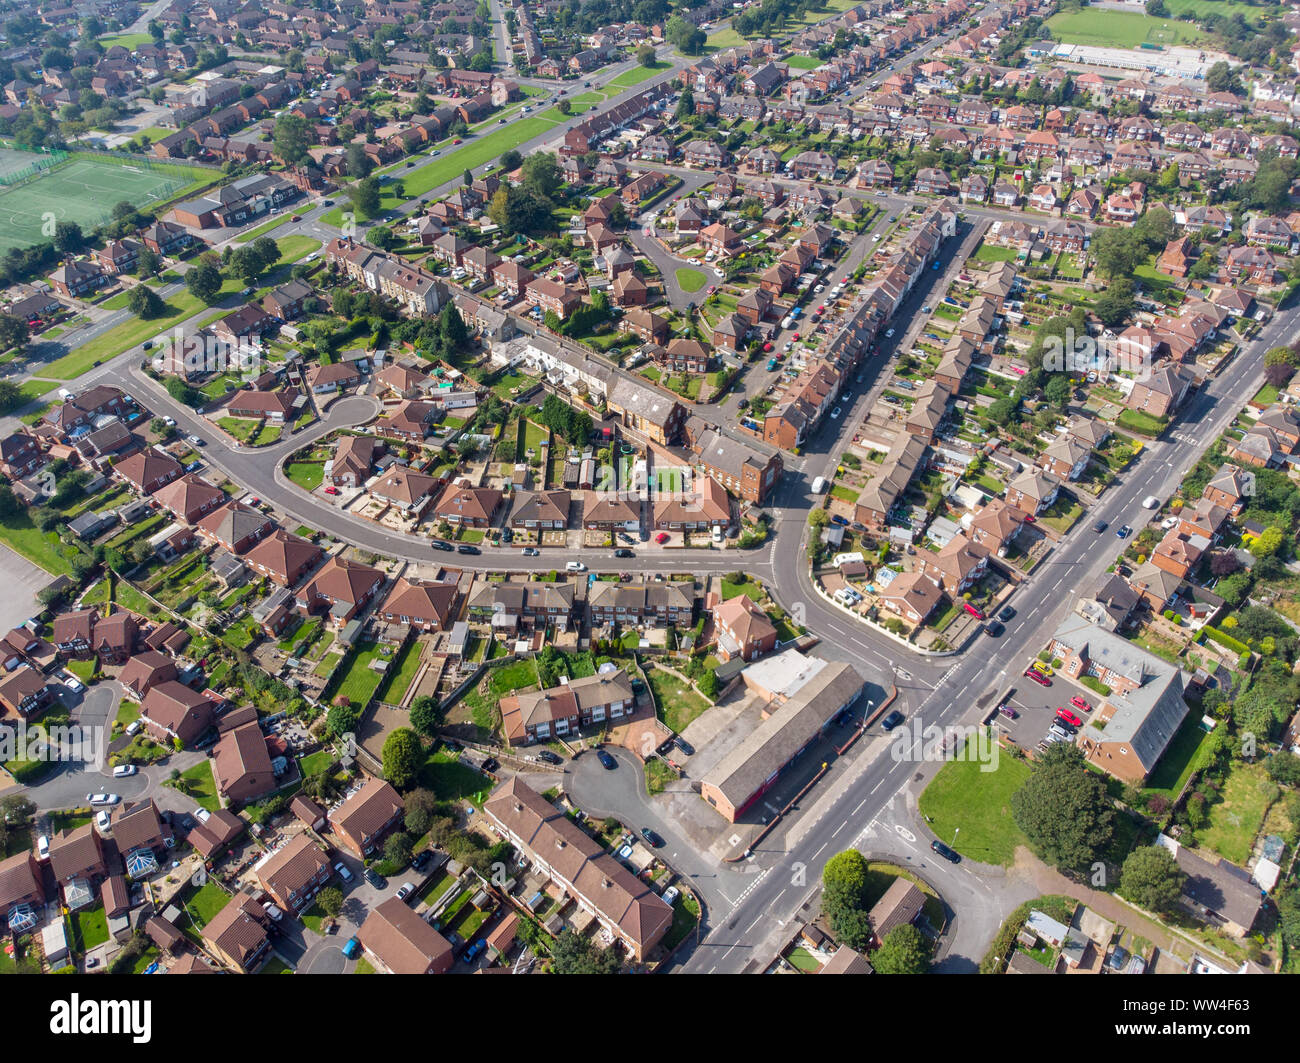 aerial-photo-of-the-british-town-of-middleton-in-leeds-west-yorkshire-showing-typical-suburban-housing-estates-with-rows-of-houses-WW4F63.jpg